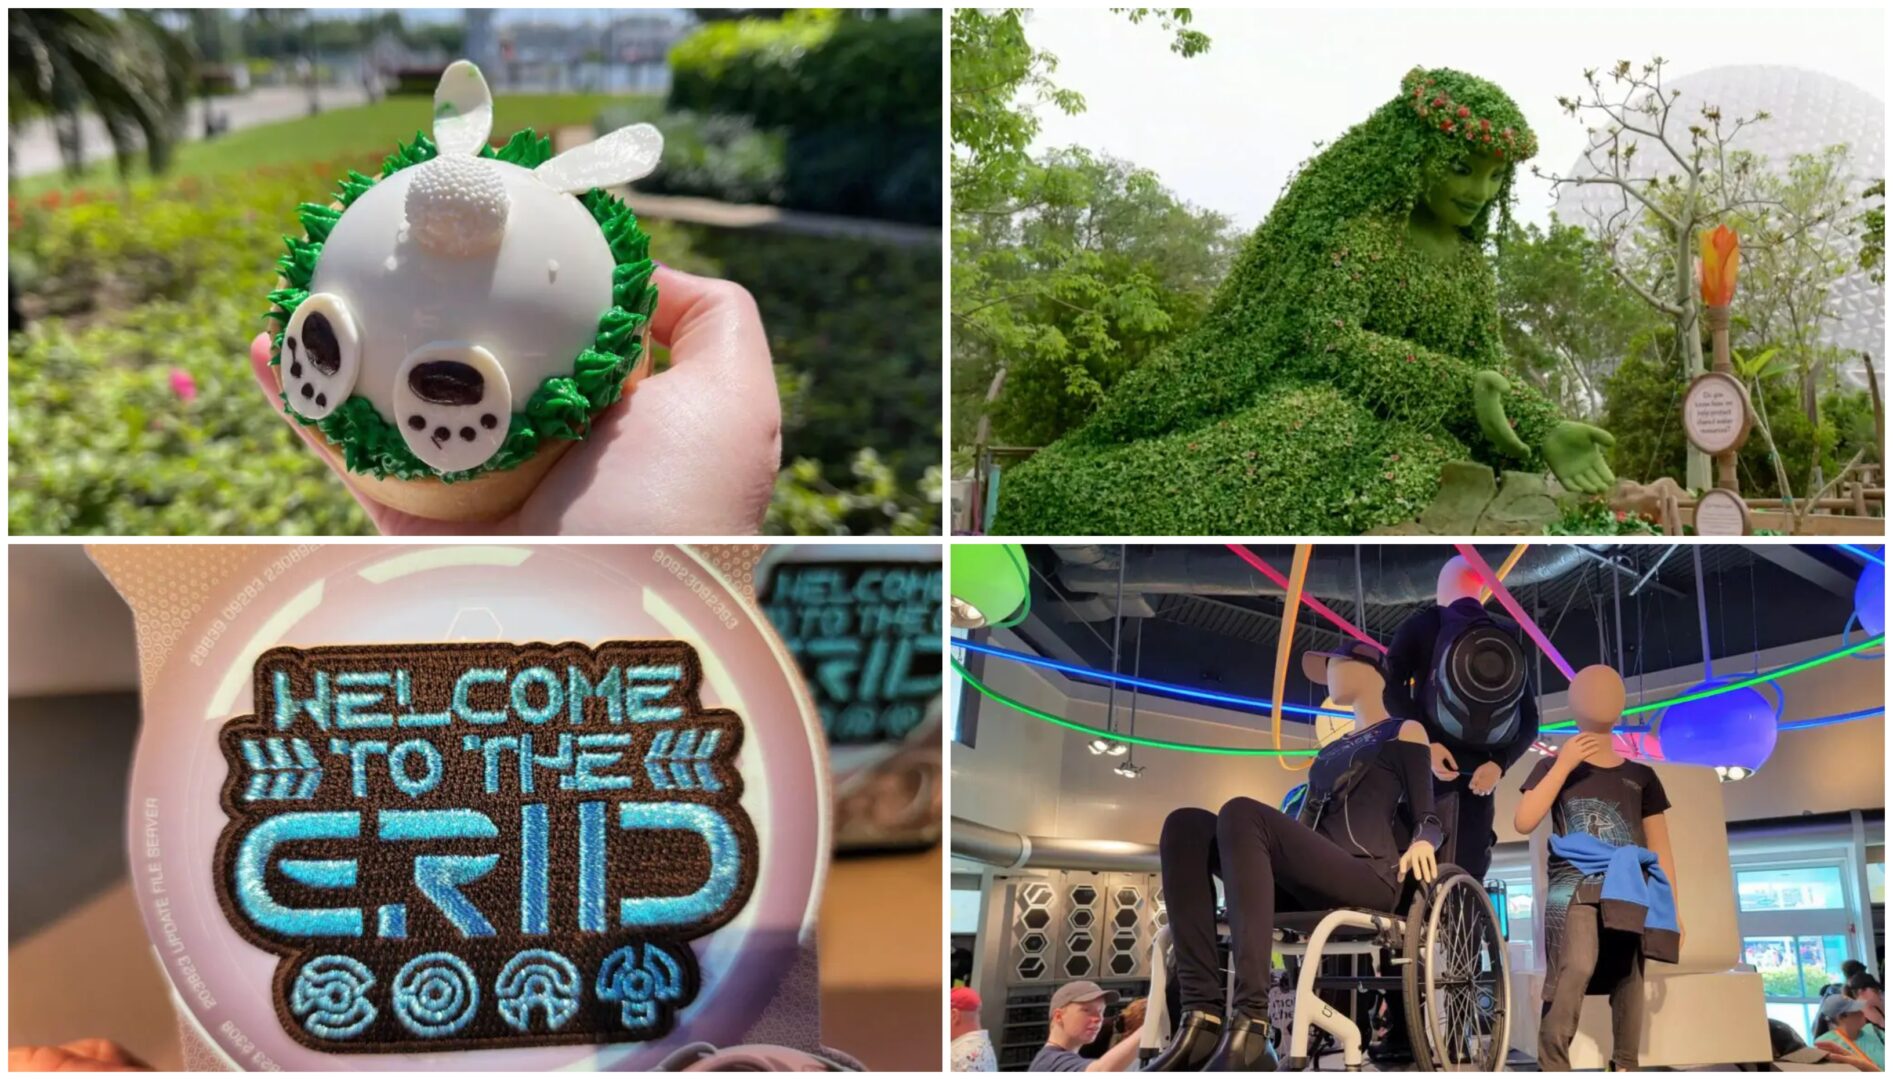 Disney News Highlights: Tron Lightcycle Merchandise Takes over Tomorrowland, Dwayne Johnson’s Moana Live-action Remake, Bunny Butts are an Easter Treat, Muppets Mayhem Coming Soon